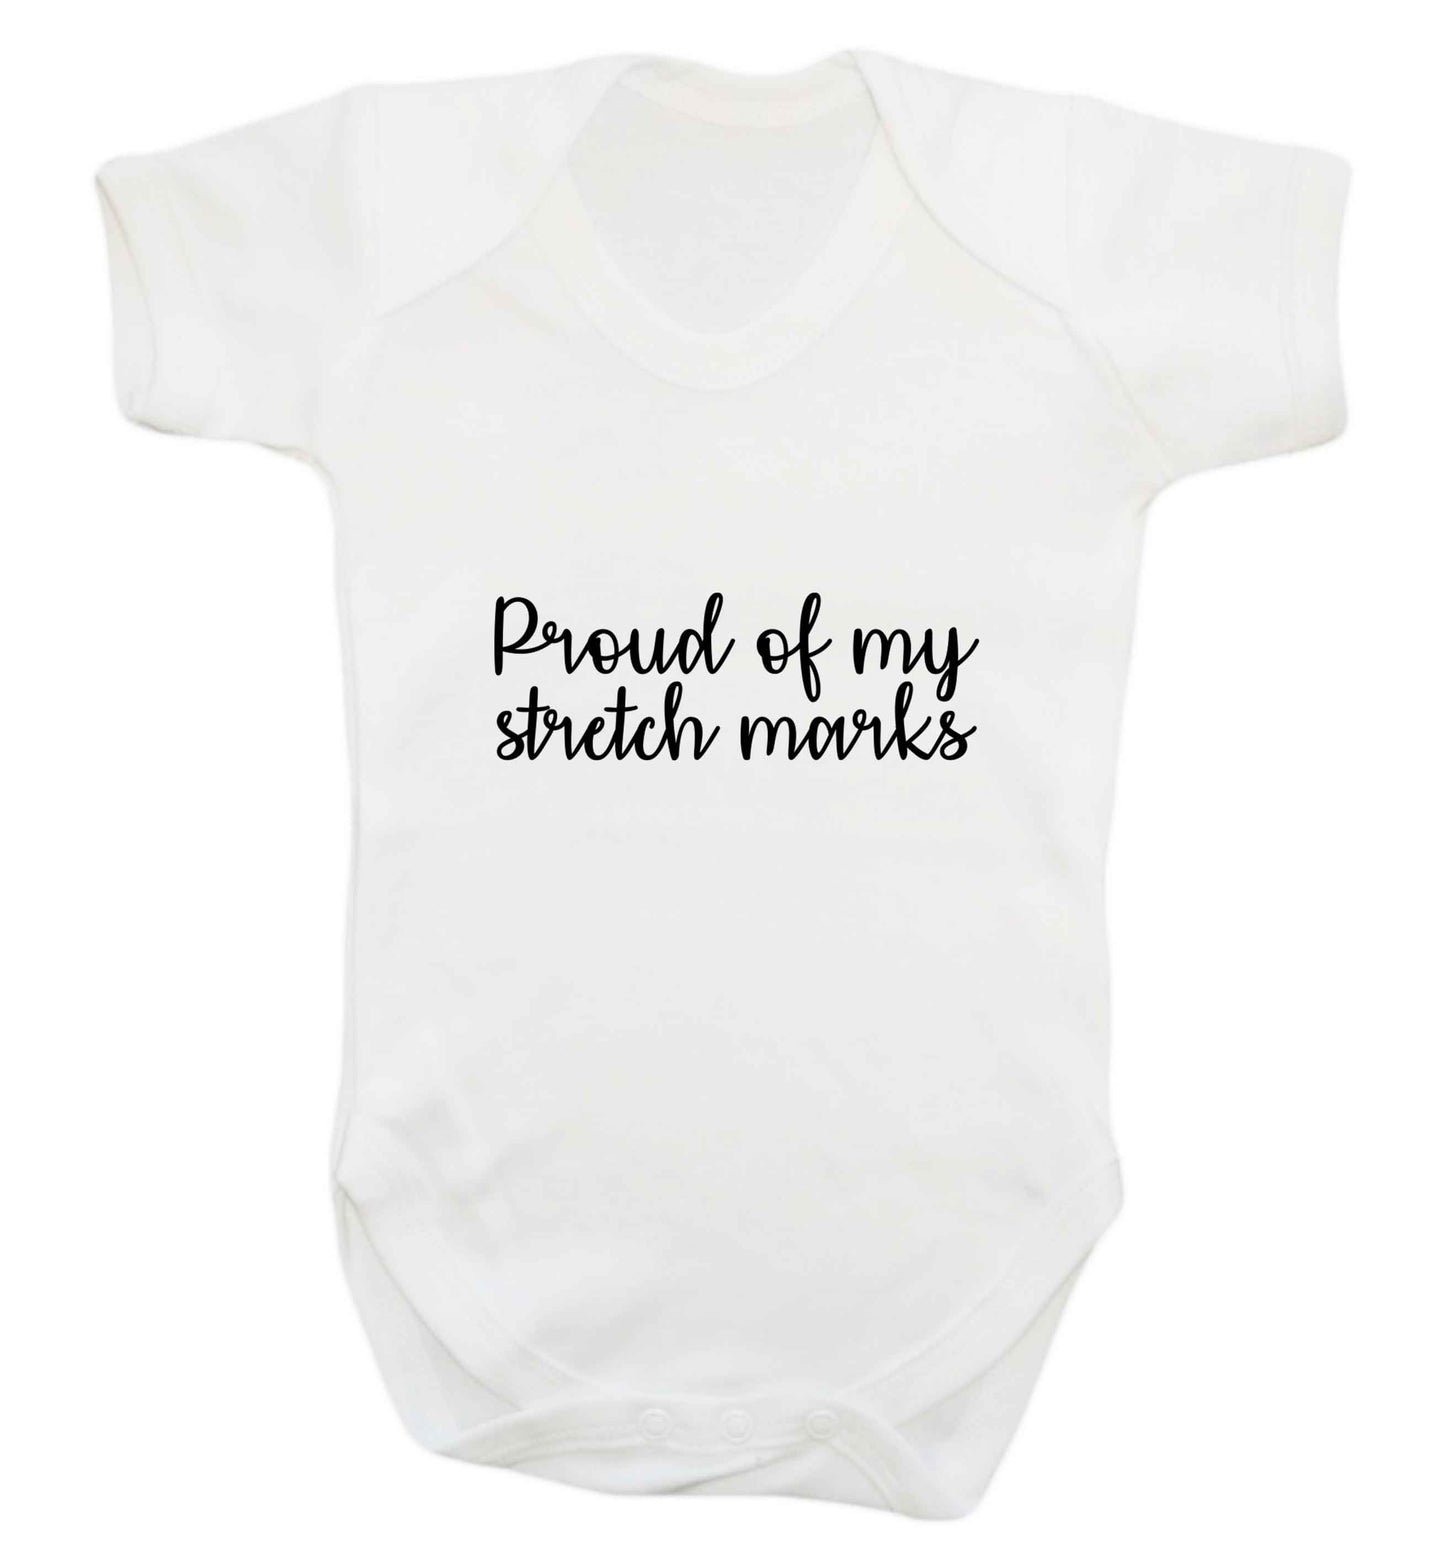 Proud of my stretch marks baby vest white 18-24 months